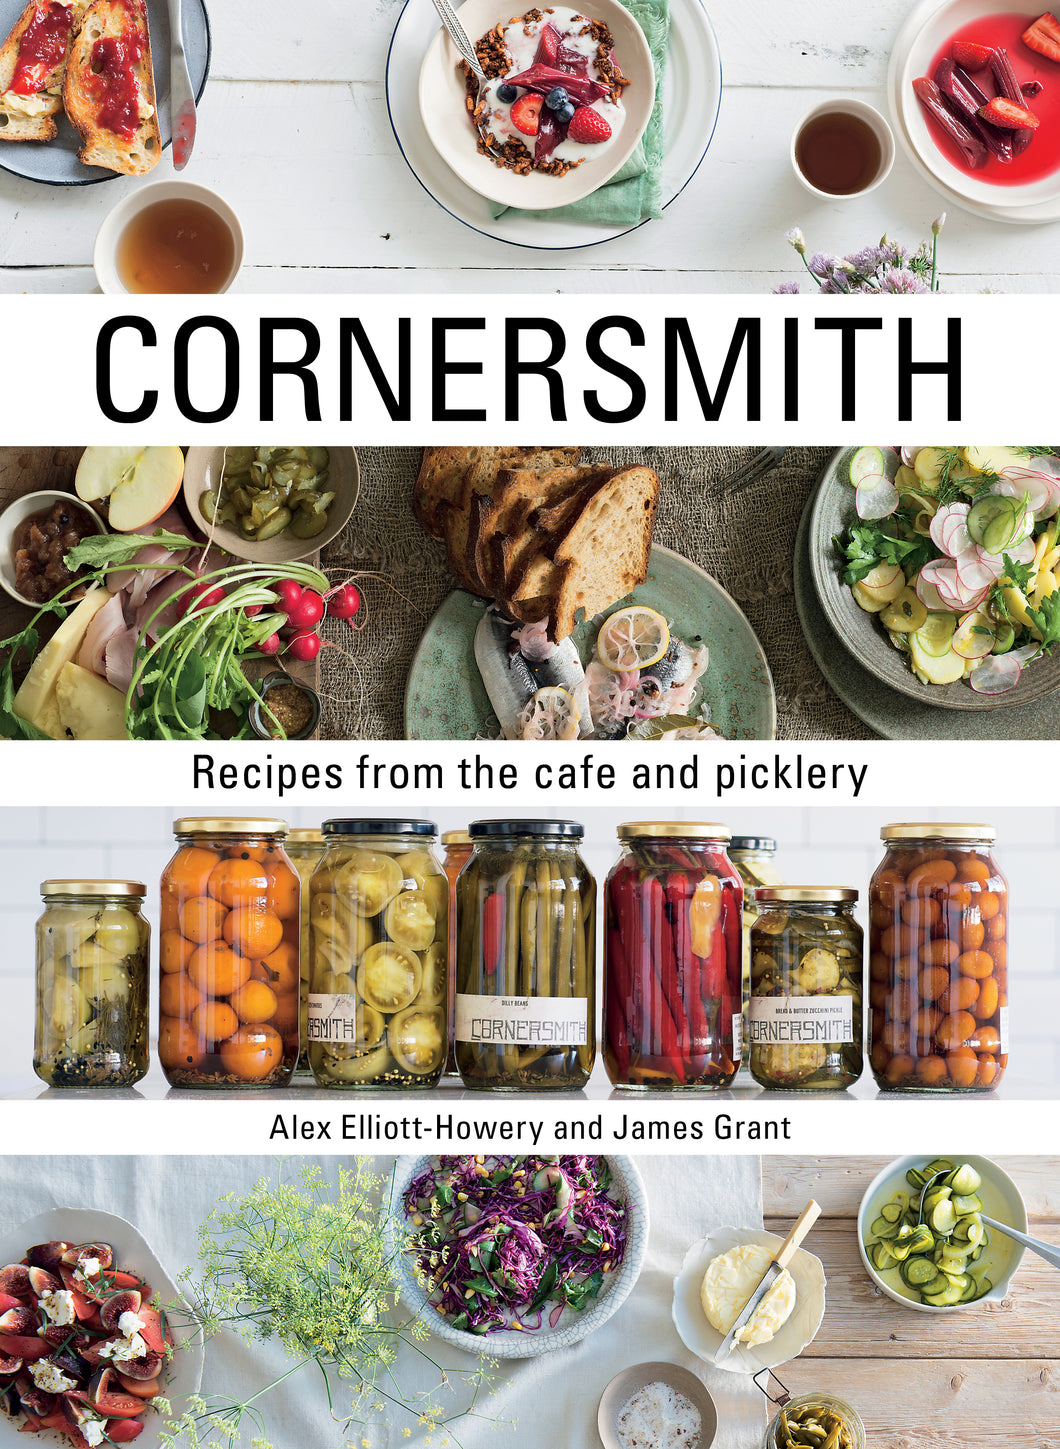 Cornersmith: Recipes from the Cafe & Picklery Cookbook